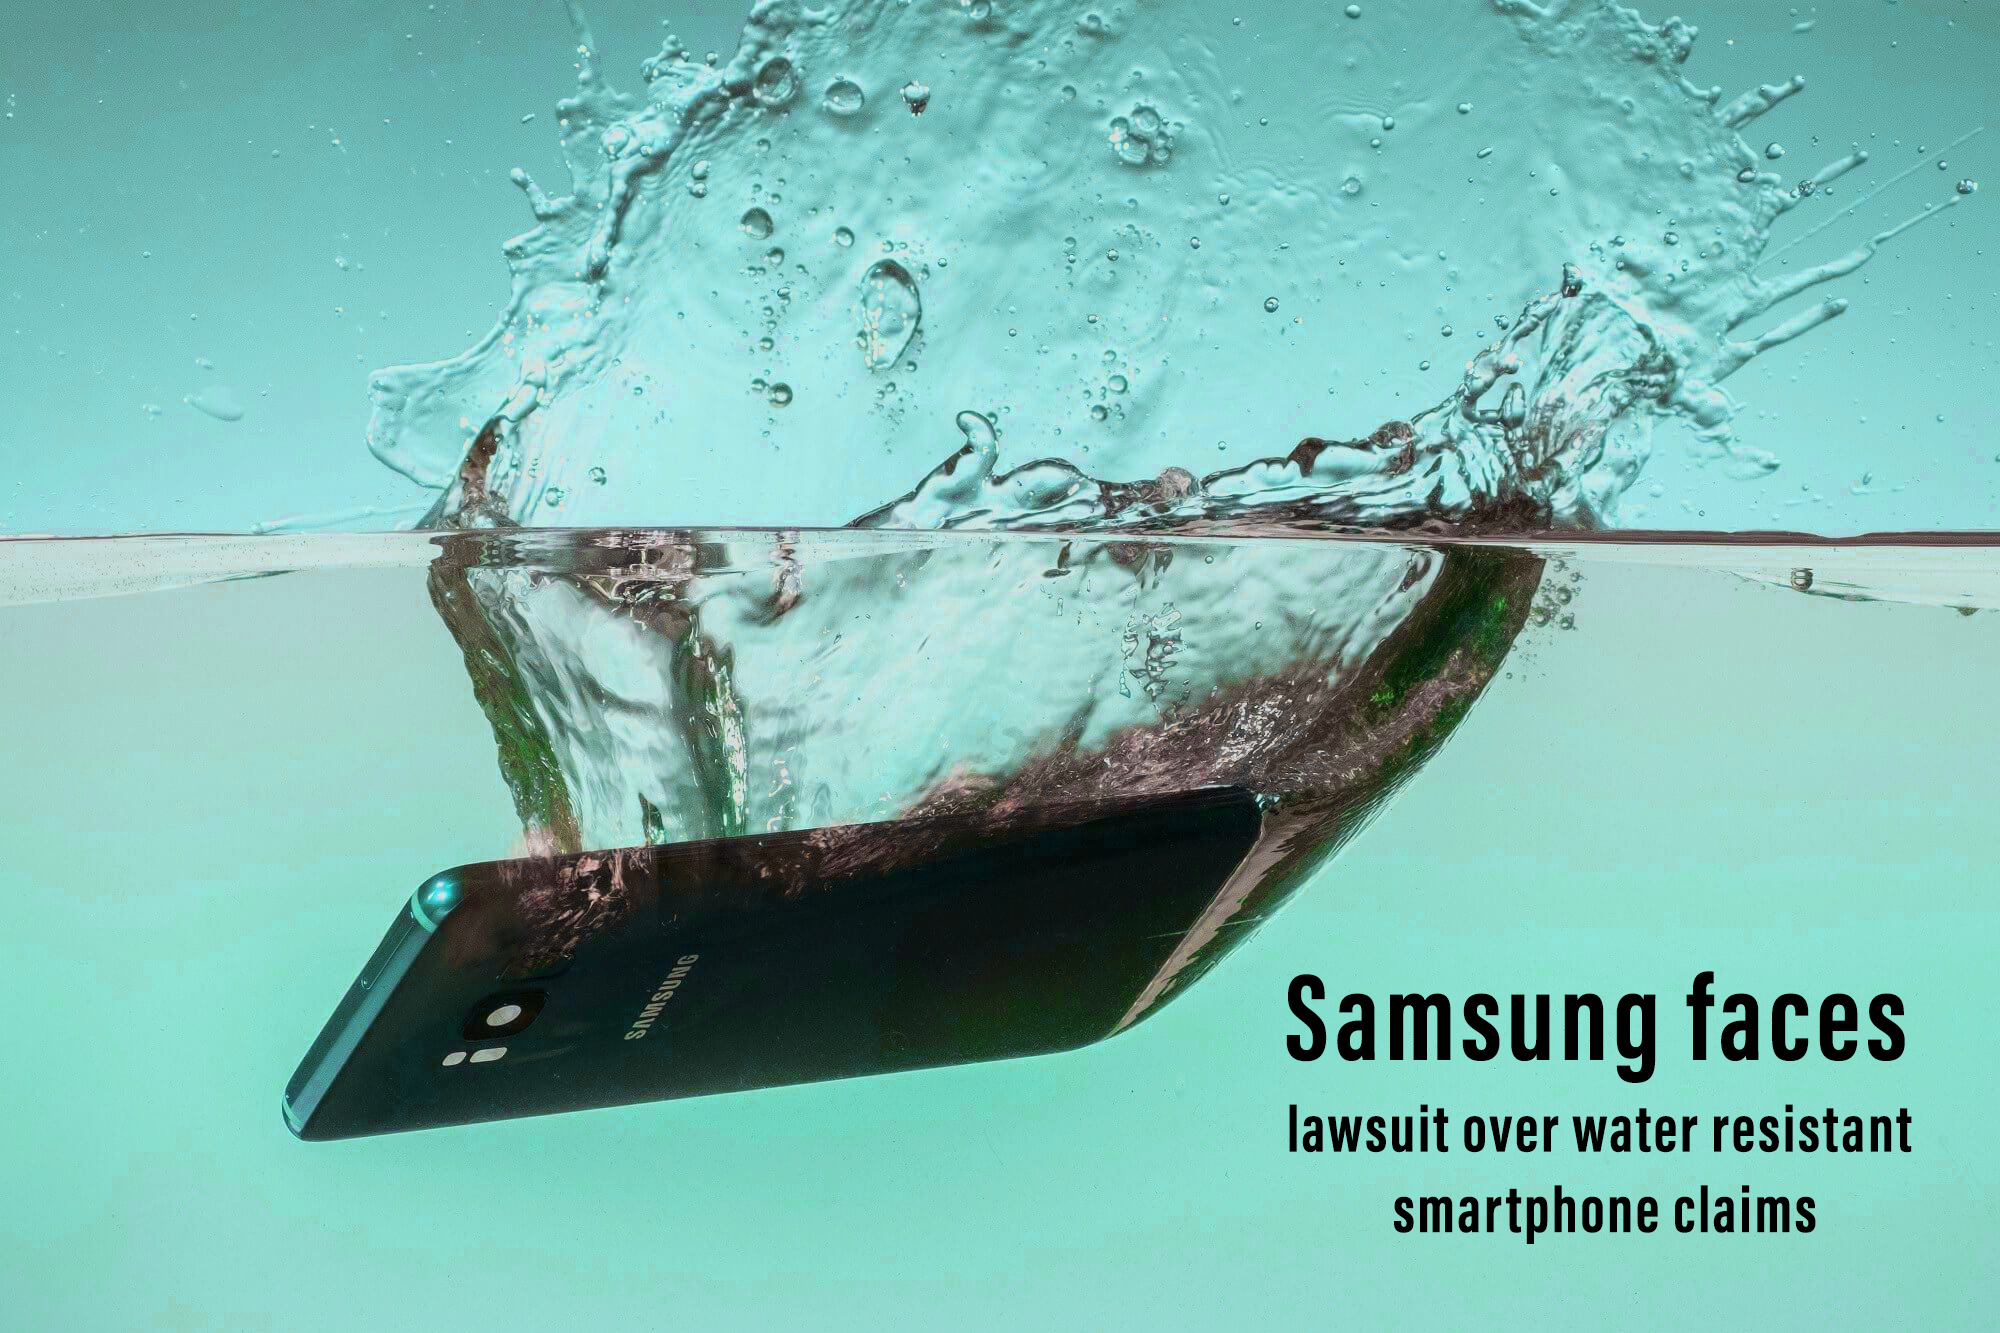 Samsung is Facing Legal Case against claims of Water Resistant Phone